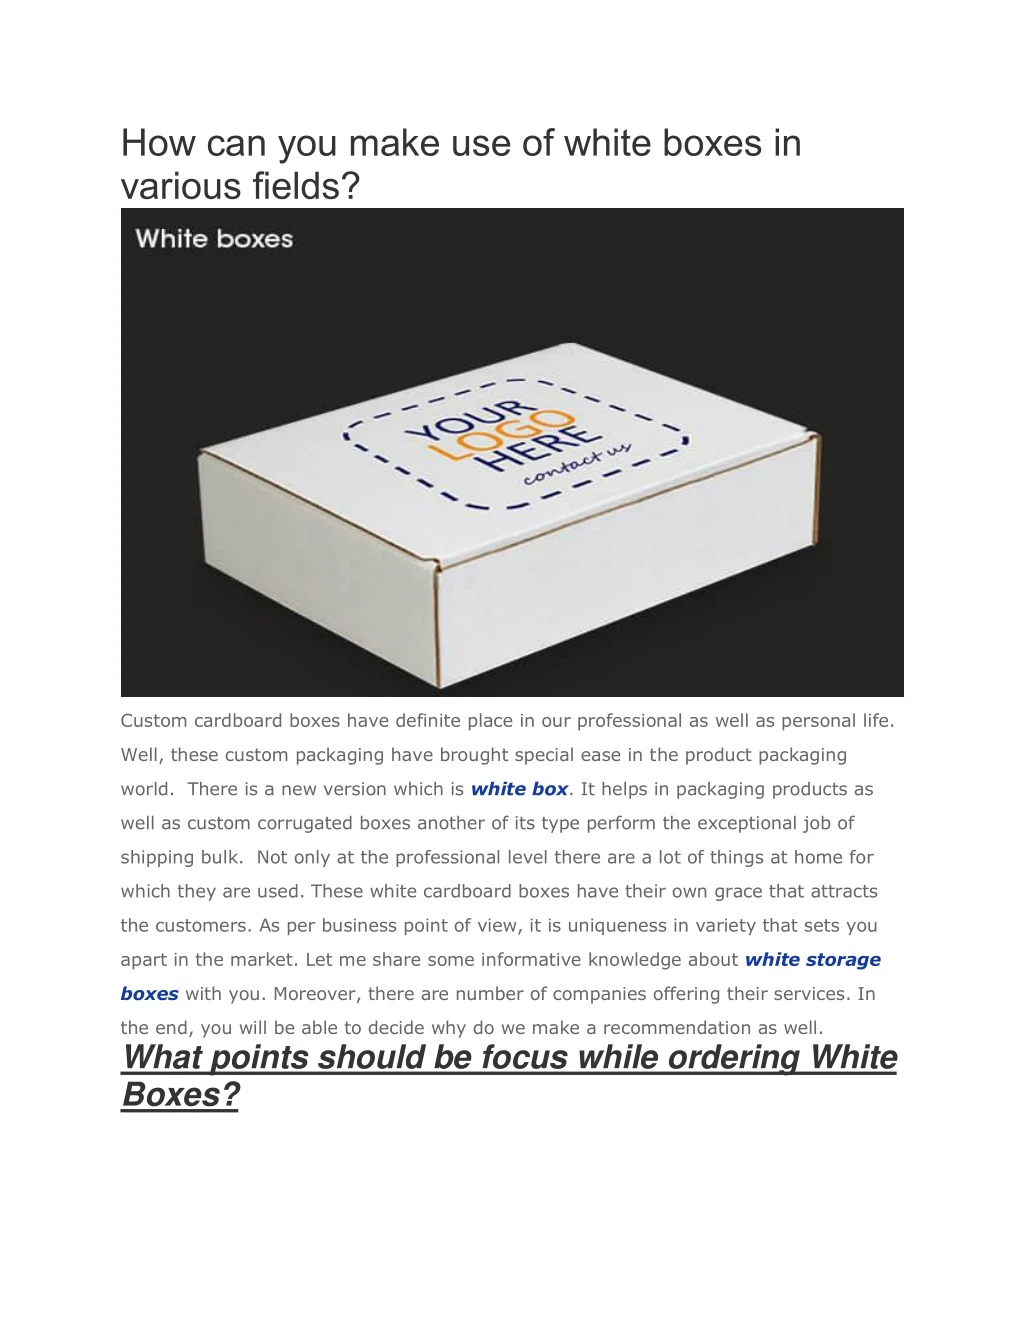 how can you make use of white boxes in various